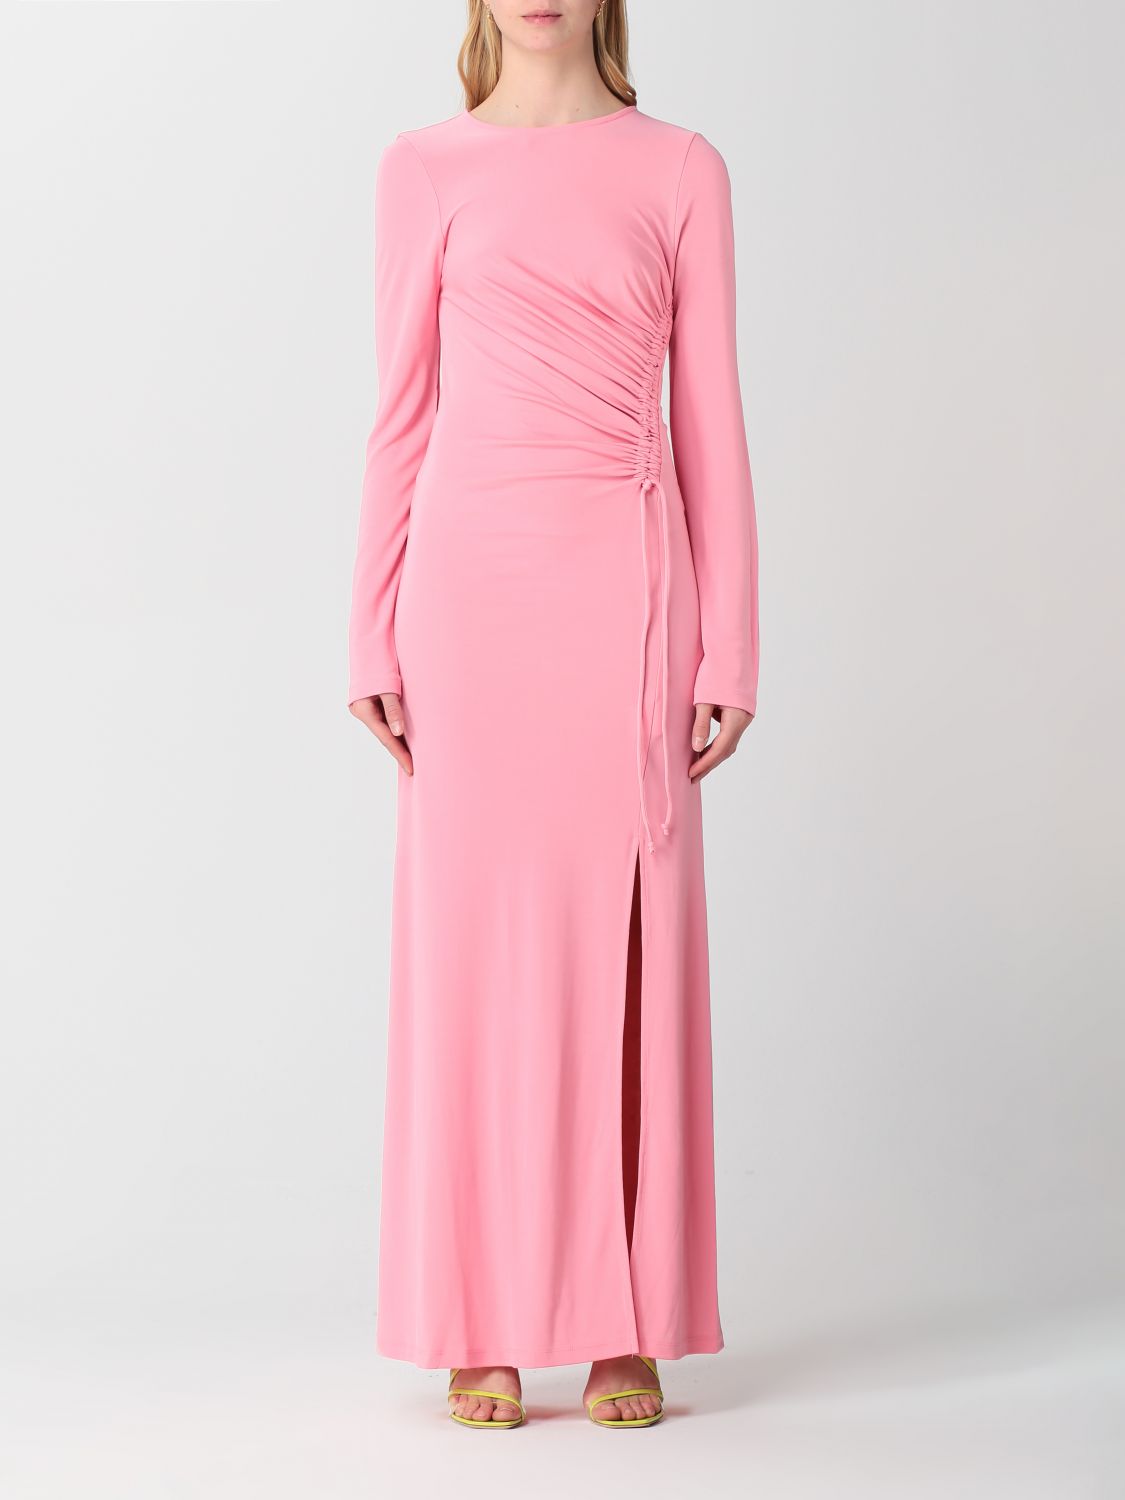 ROHE: dress for woman - Pink | Rohe dress 40633029 online on GIGLIO.COM